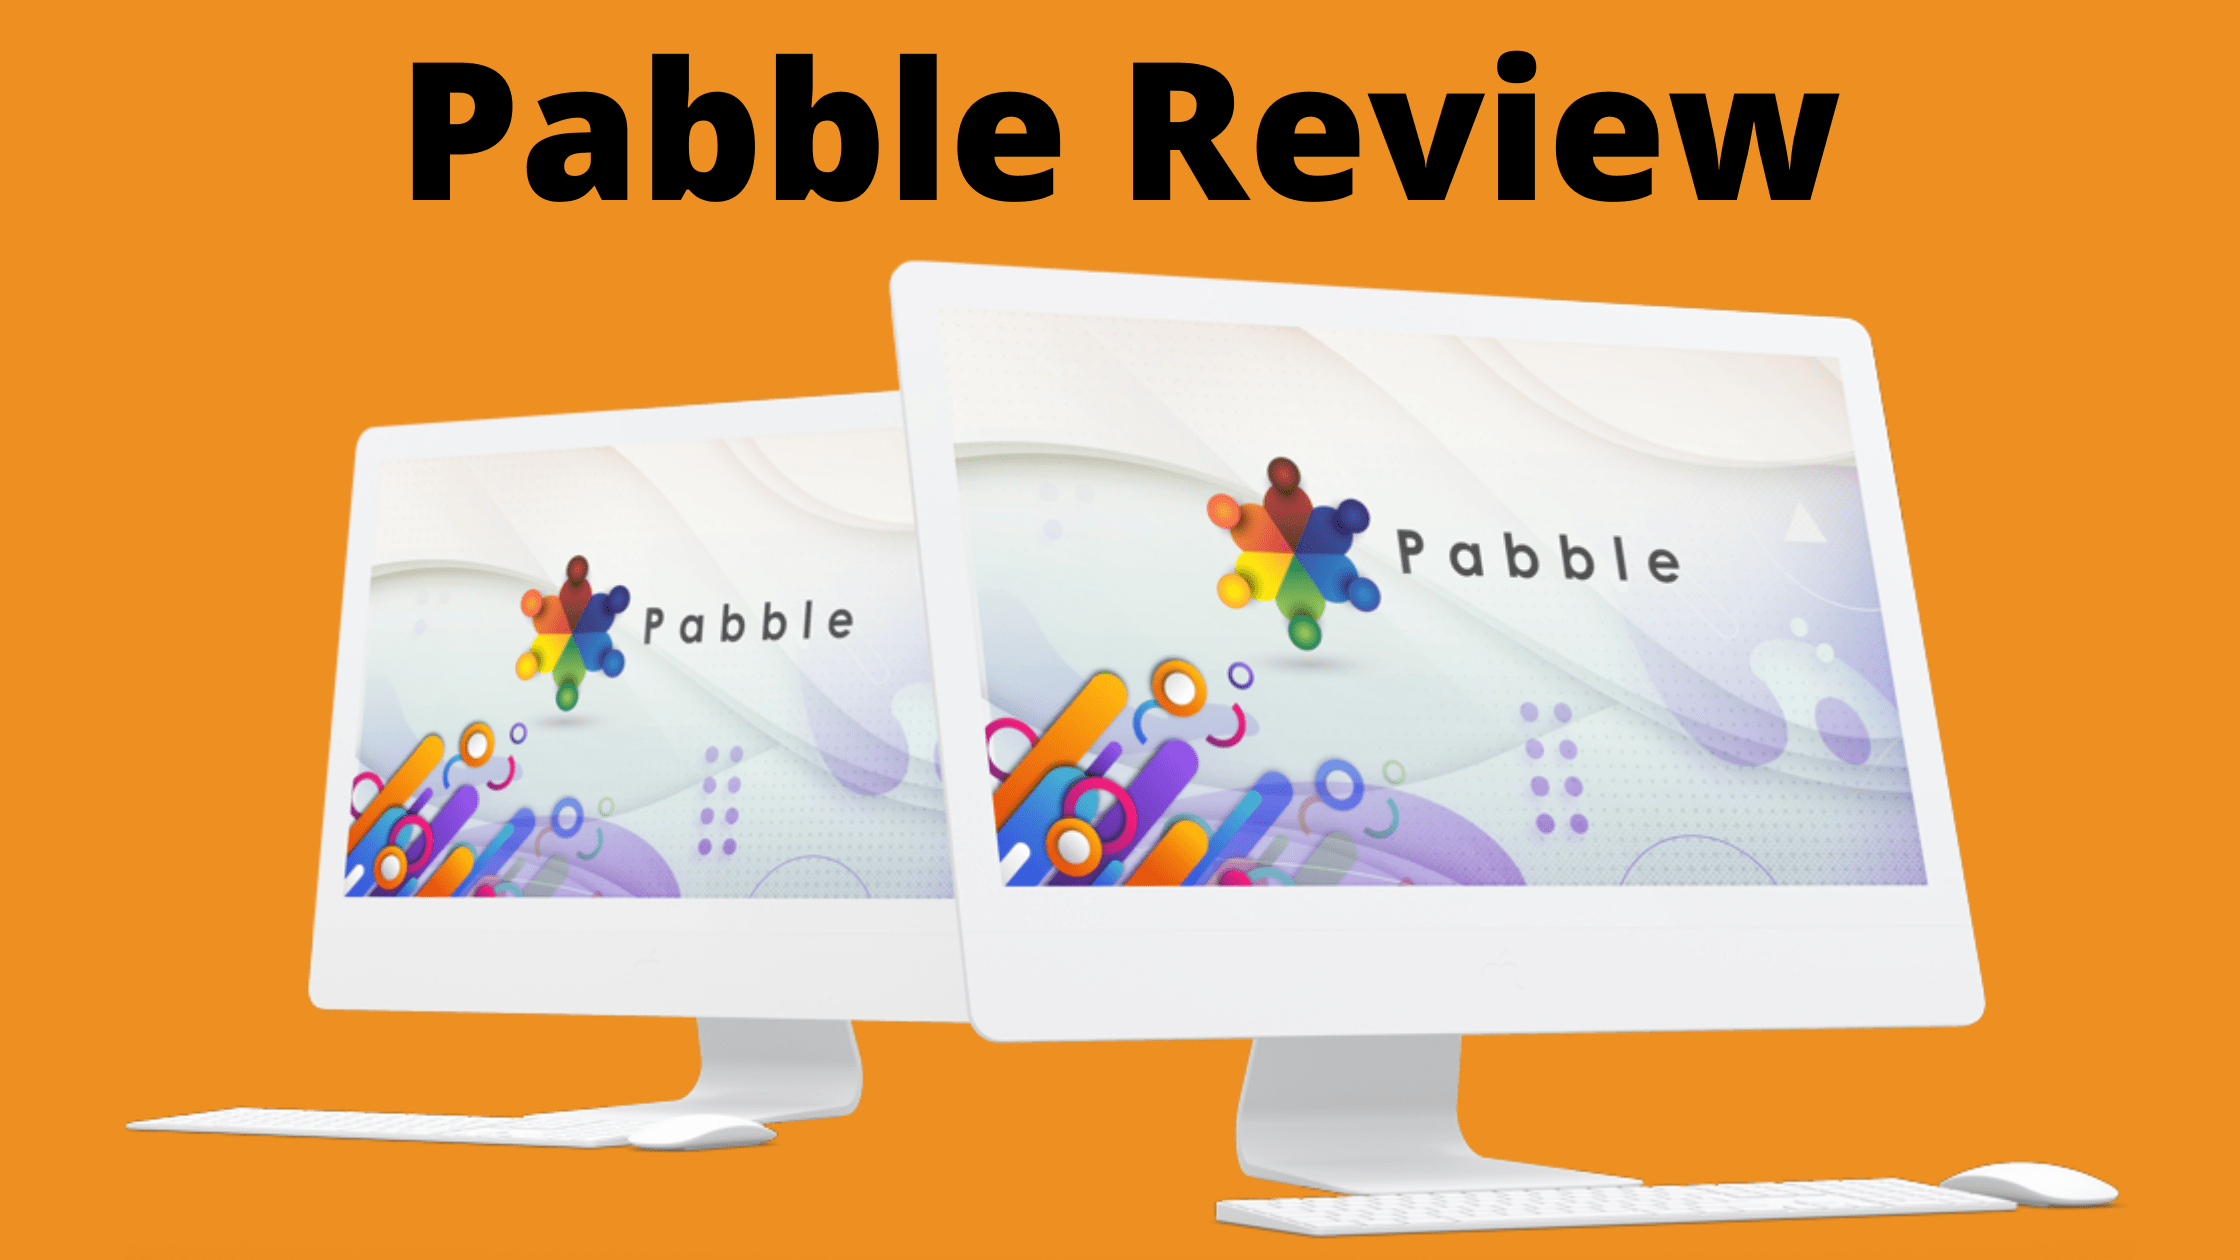 Pabble Review